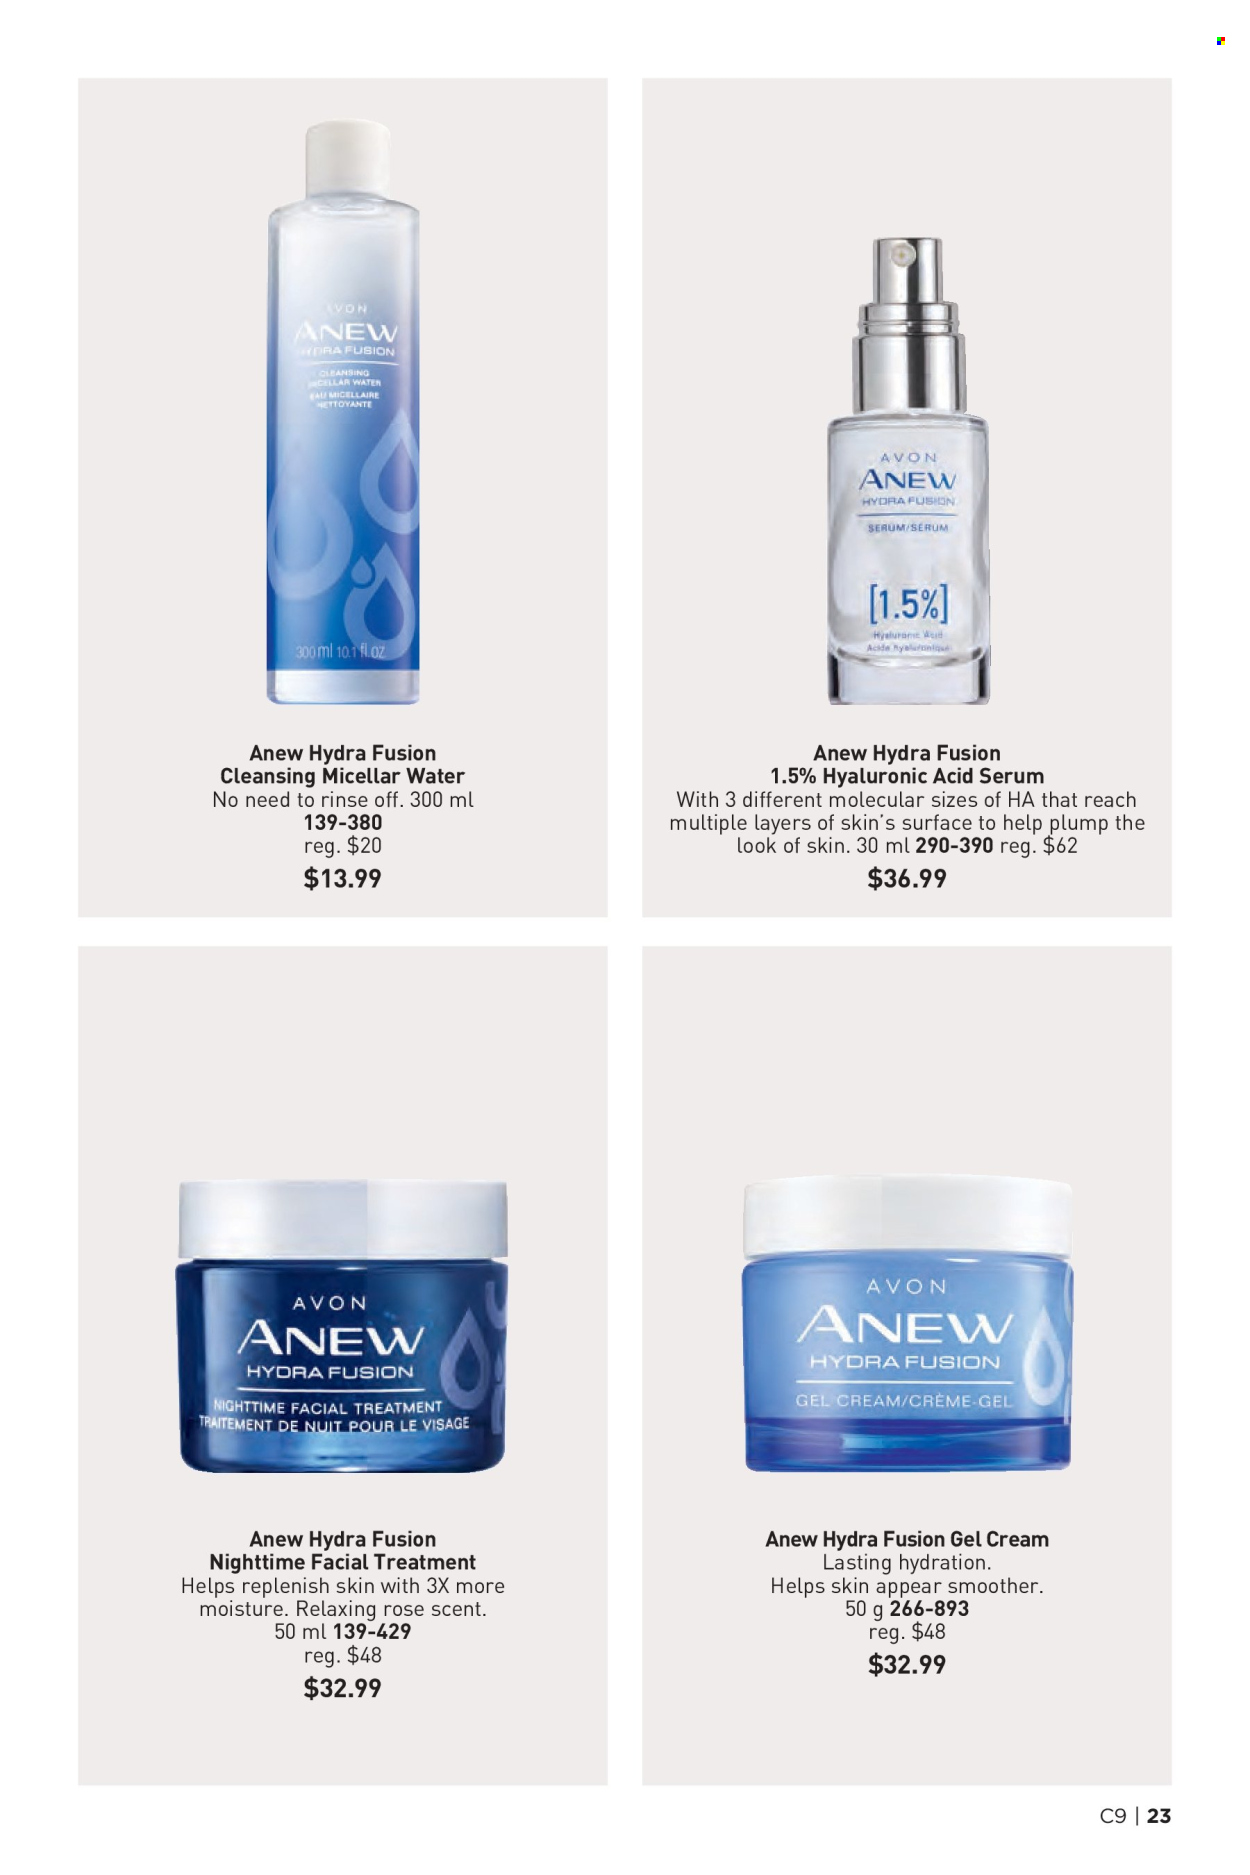 thumbnail - Avon Flyer - Sales products - Avon, Anew, gel cream, micellar water, serum, skin care product. Page 23.